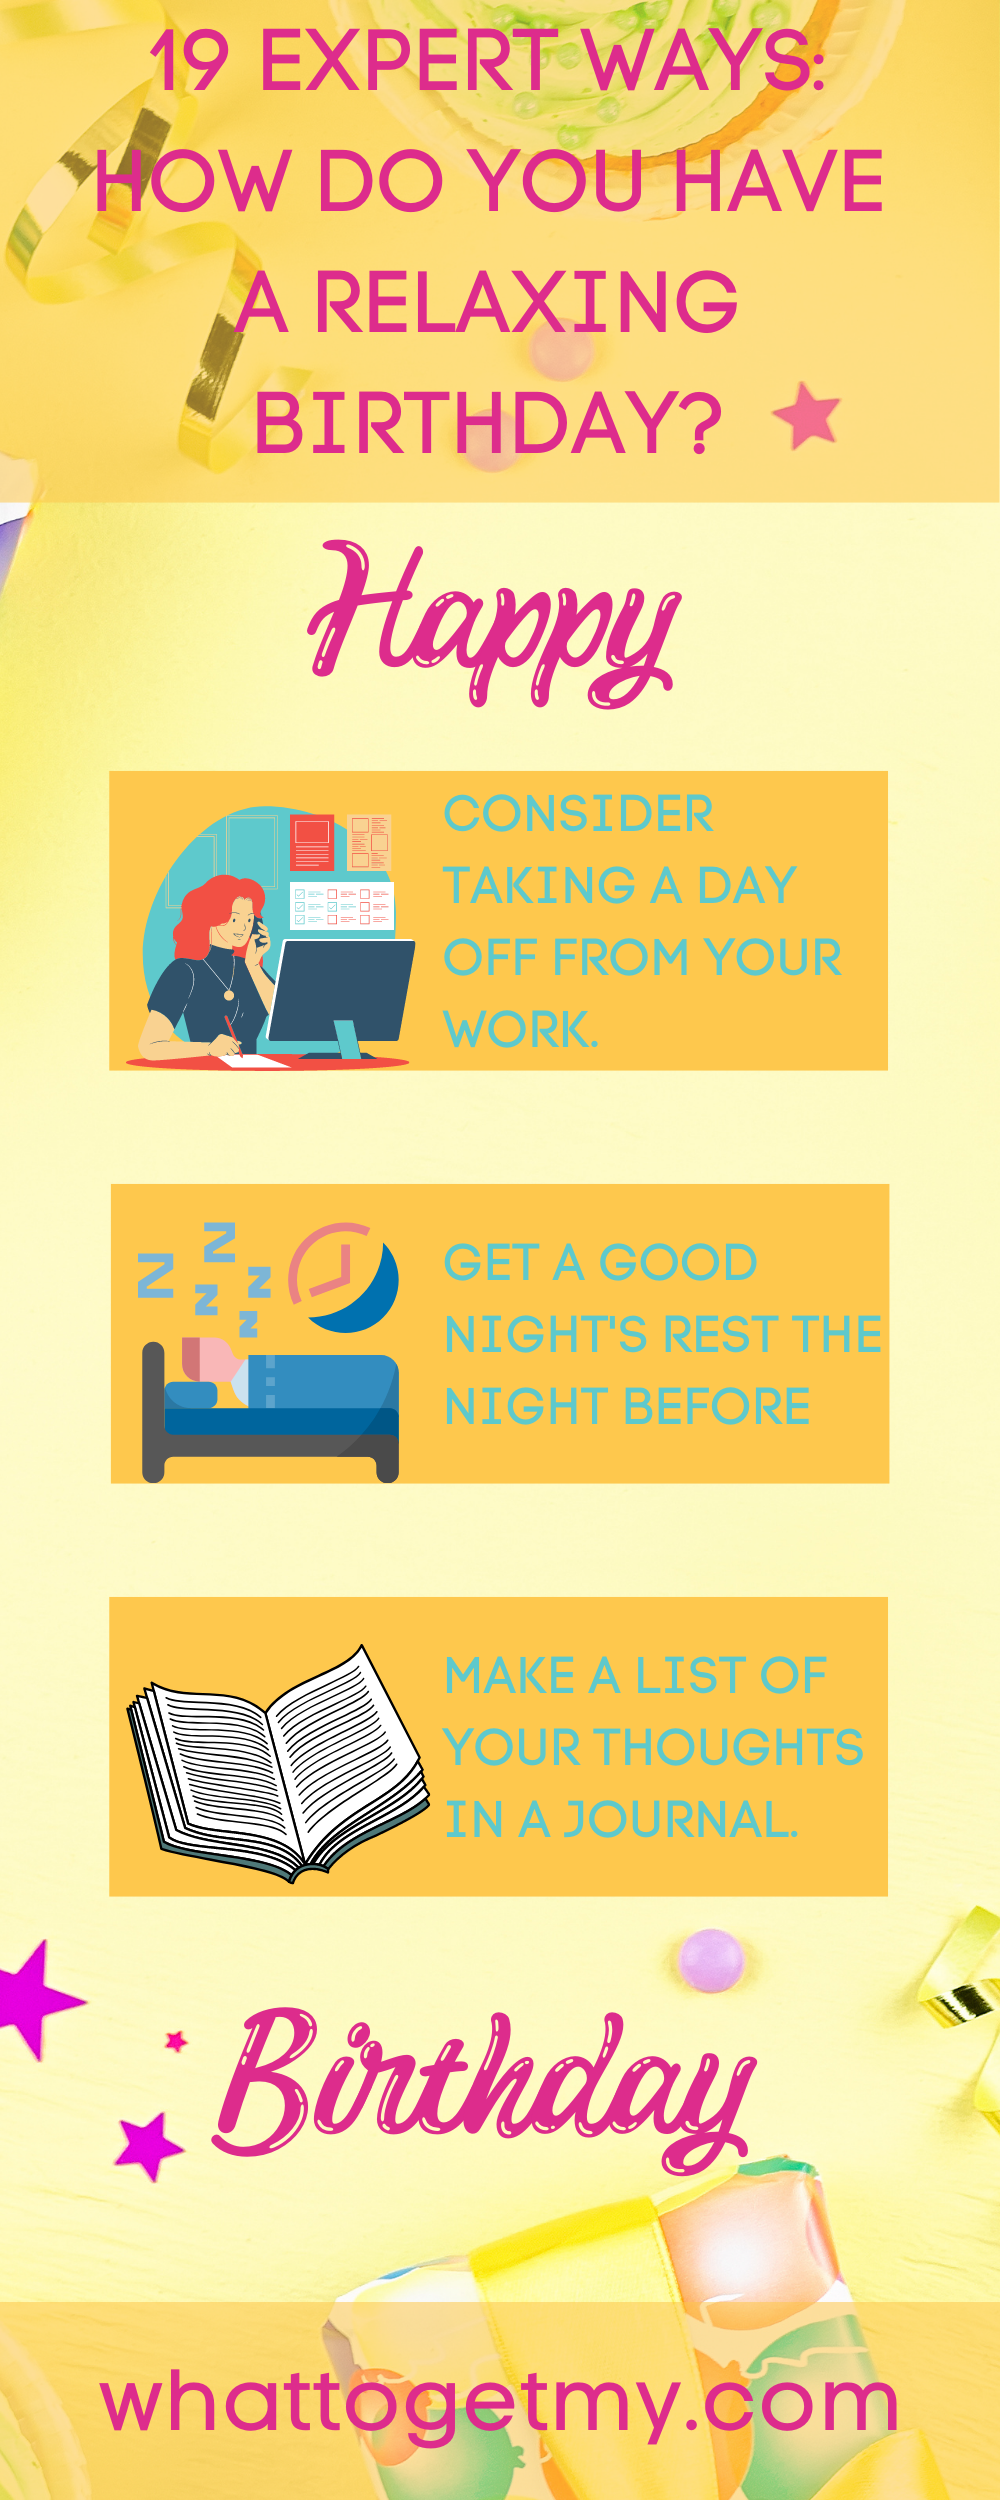 19 EXPERT WAYS HOW DO YOU HAVE A RELAXING BIRTHDAY